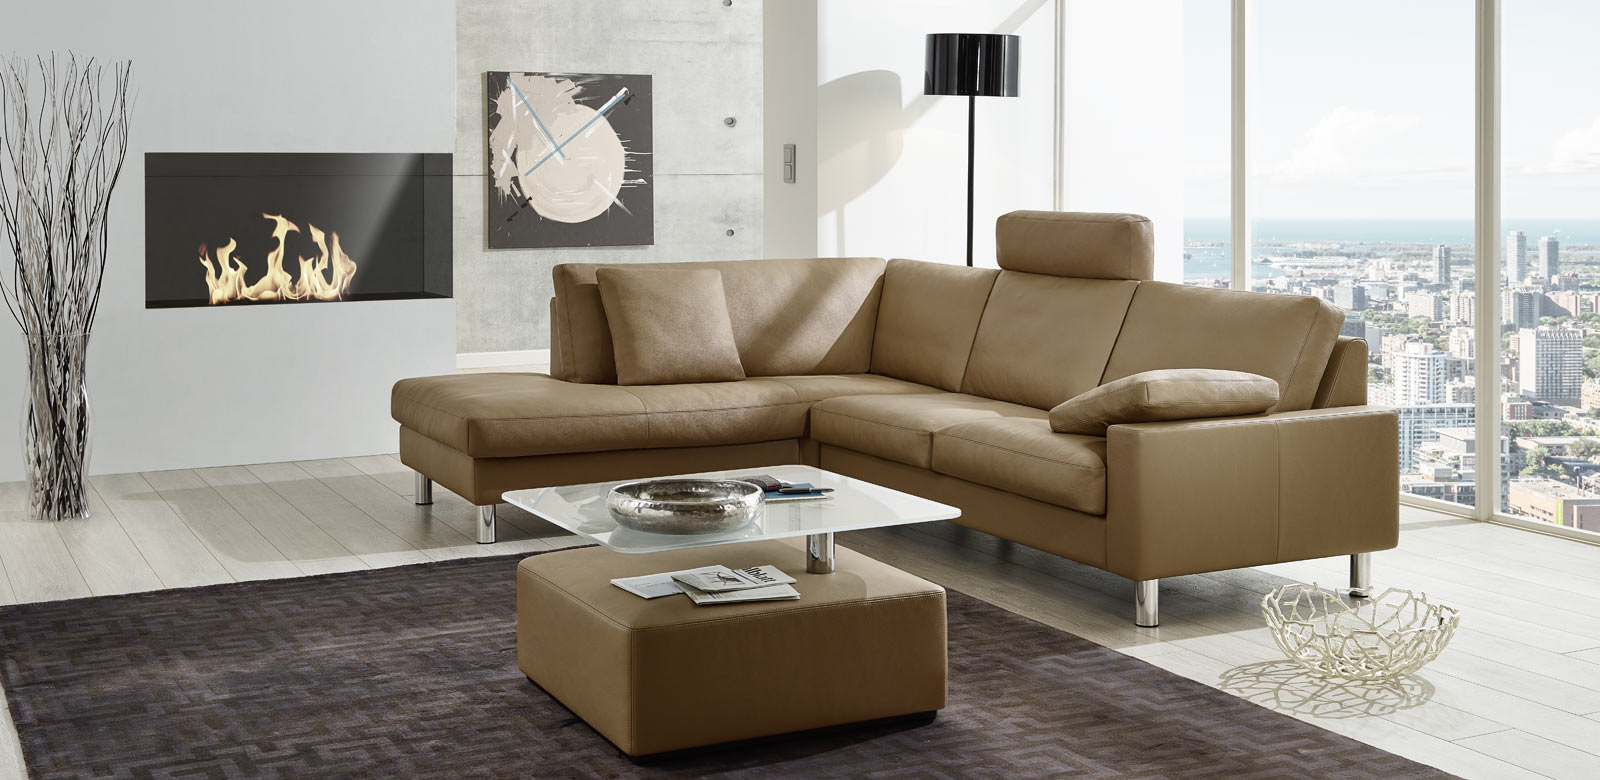 CL500 longchair version and matching coffee table in light brown leather in high-rise flat